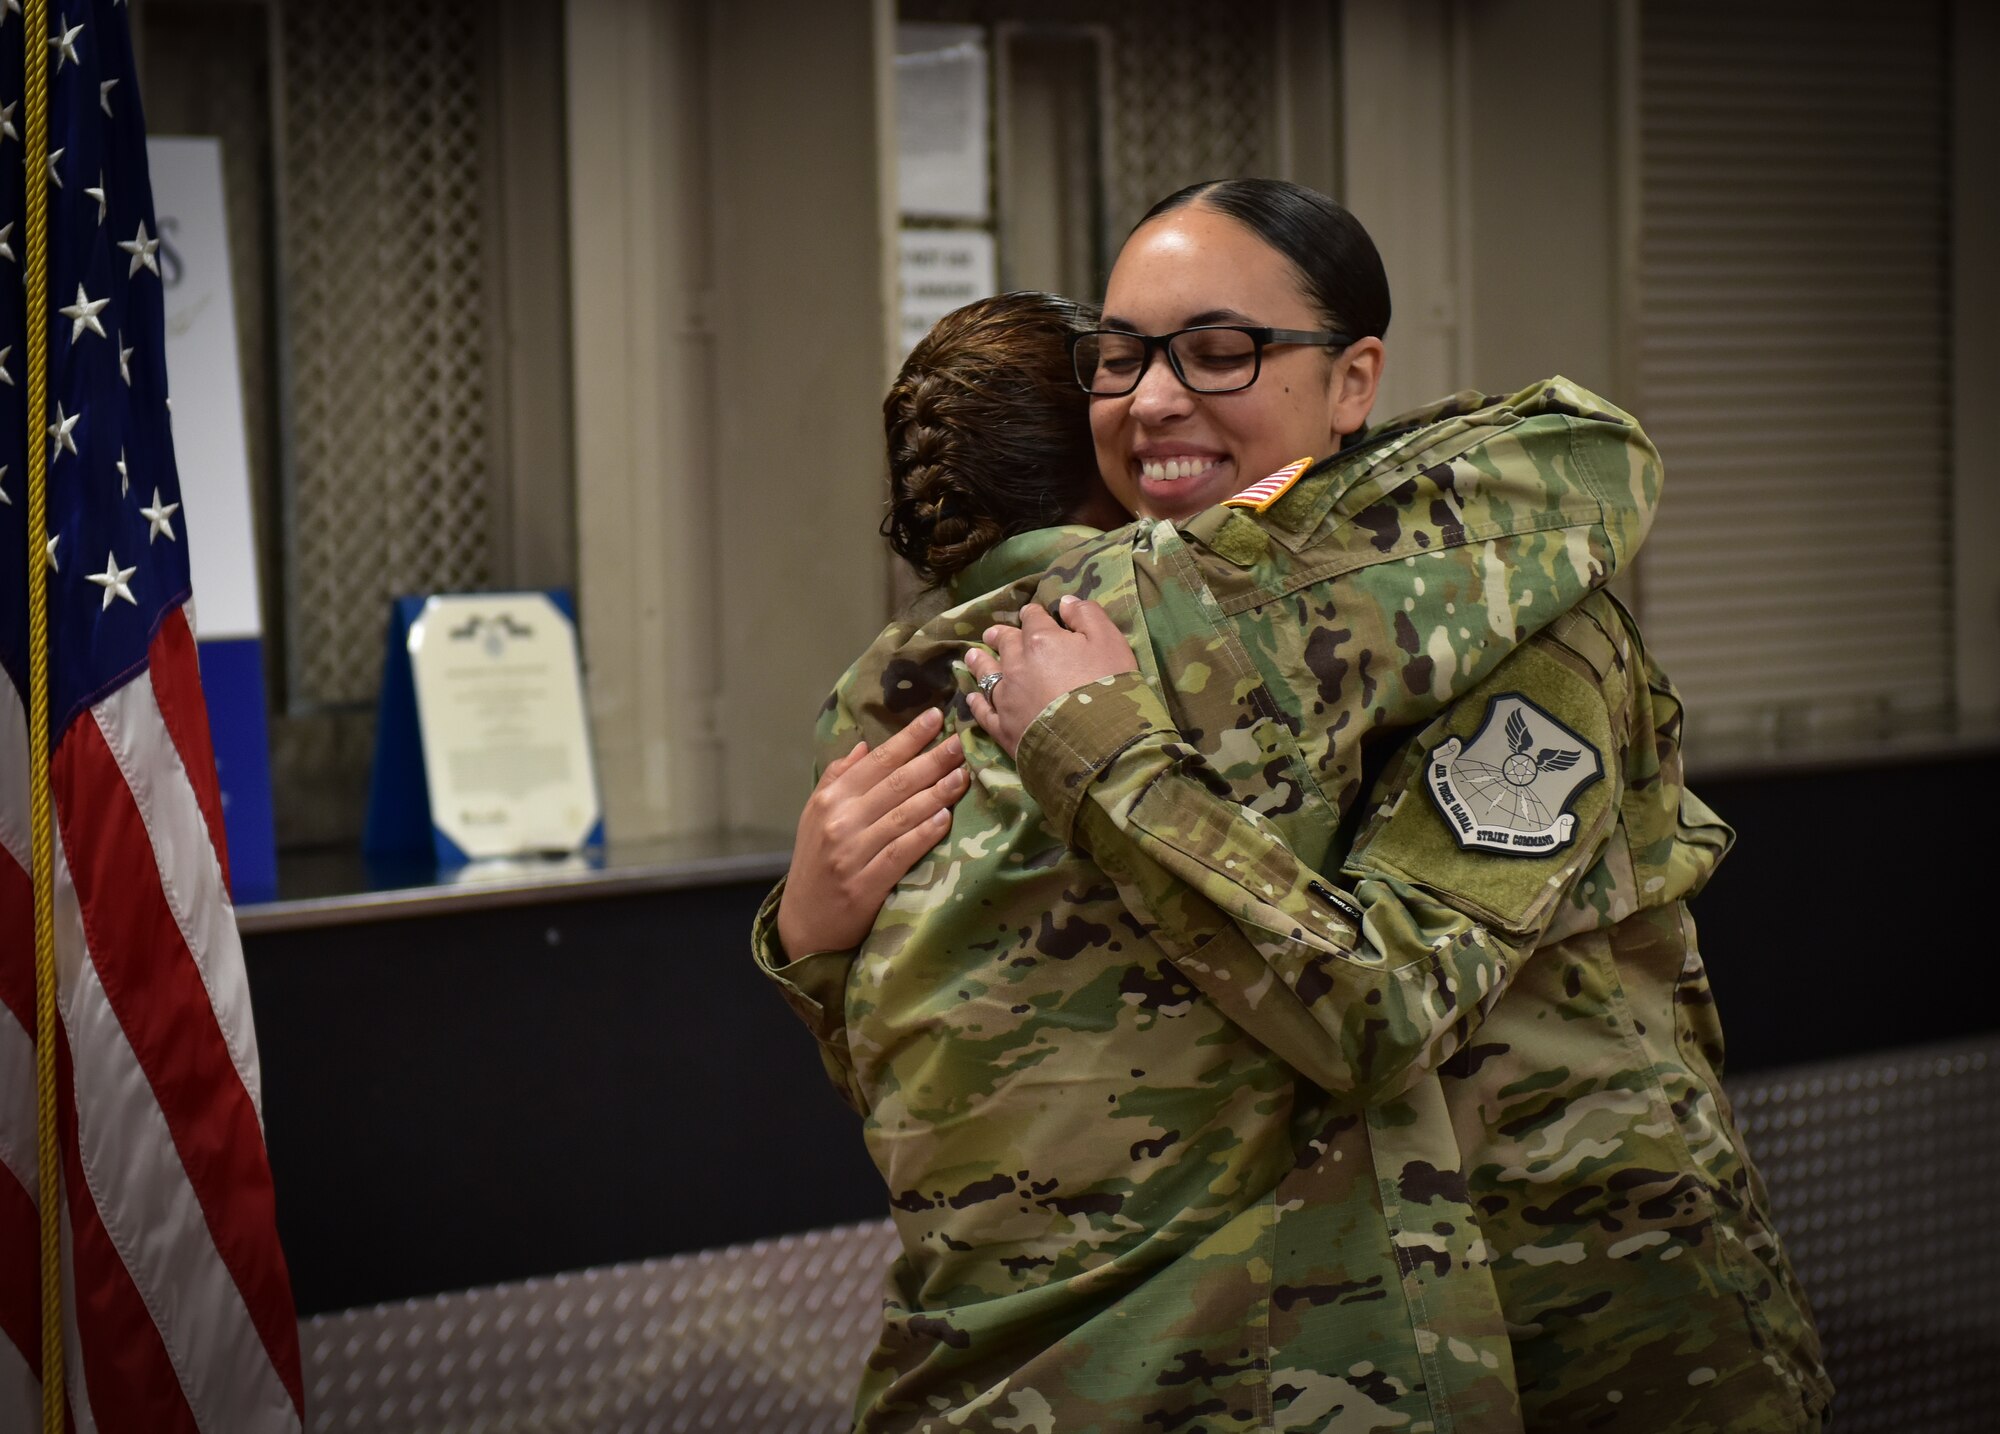 U.S. Army Maj. Darla Deauvearo, left, hugs her daughter 2nd Lt. Jasmine Scott, Aug. 10, 2018, after she read her the oath of office during a commissioning ceremony at Whiteman Air Force Base. Scott was a member of the 509th Bomb Wing and commissioned into the medical services field.  (U.S. Air Force photo by Tech. Sgt. Alexander W. Riedel)